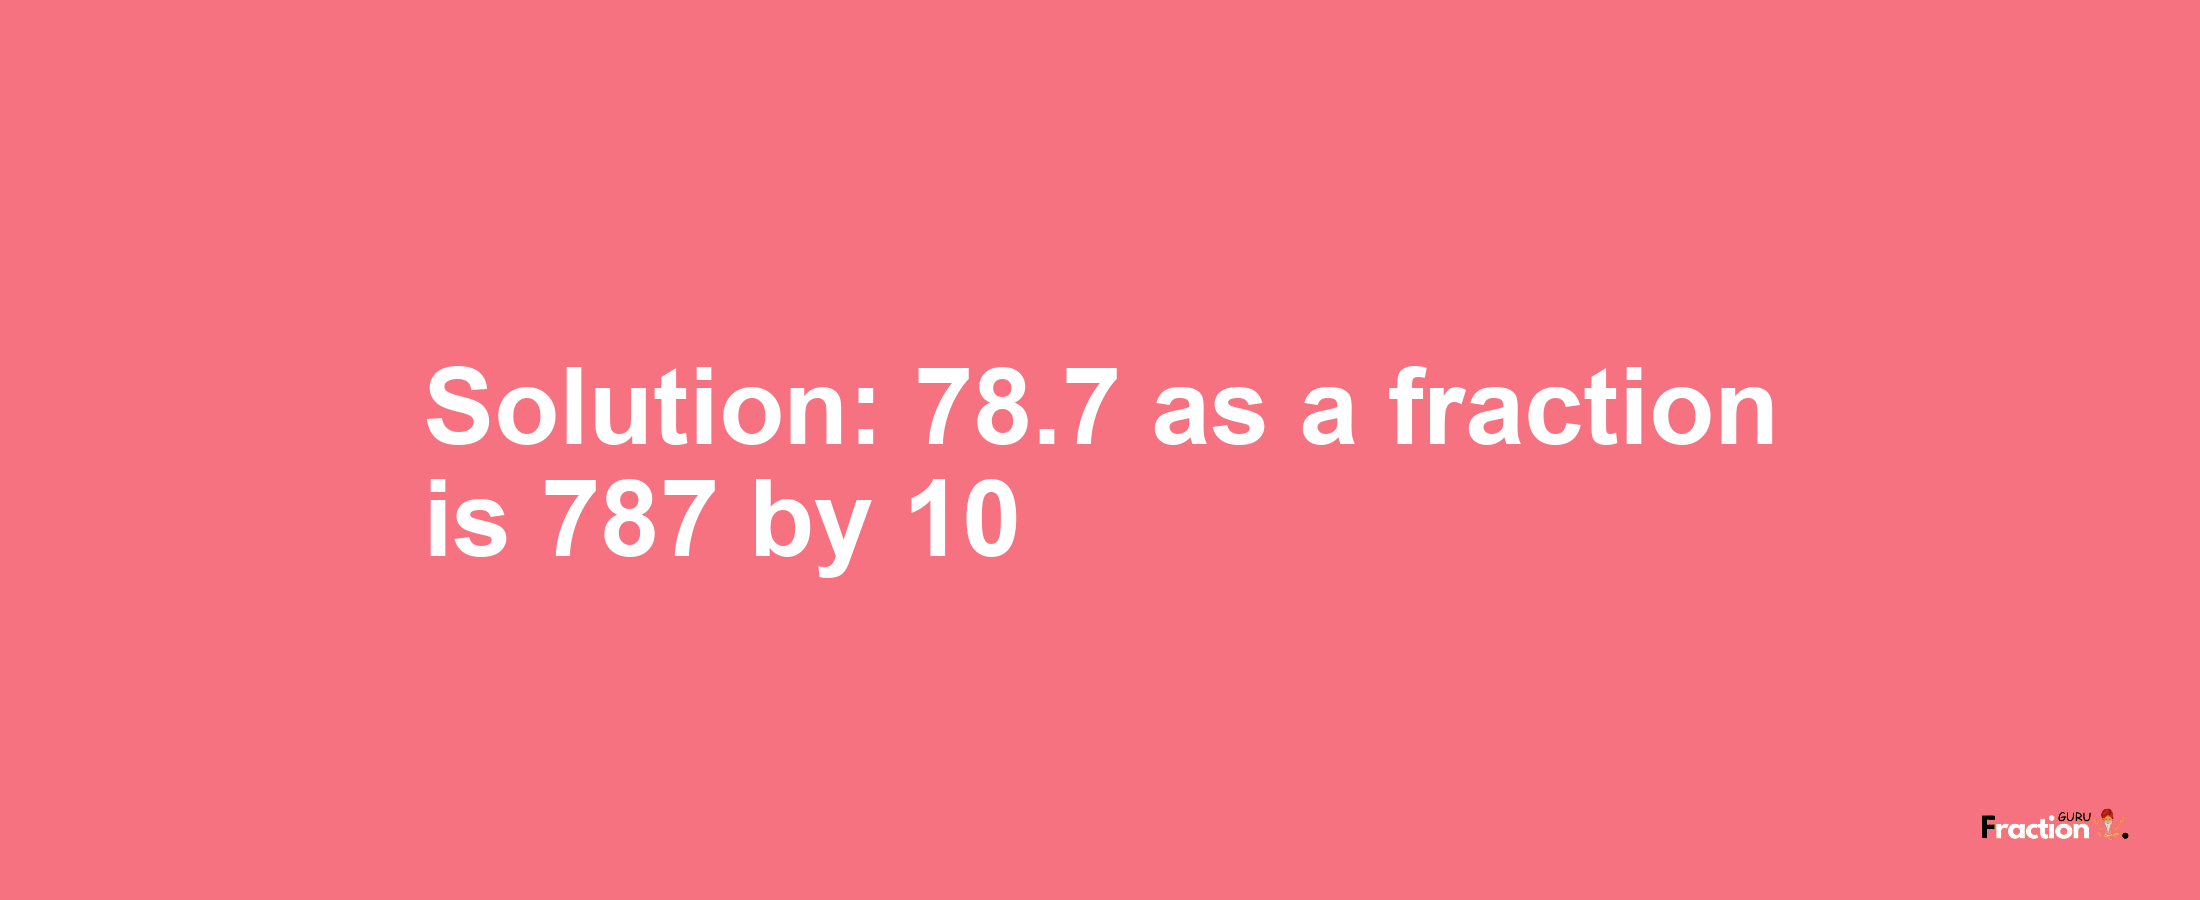 Solution:78.7 as a fraction is 787/10